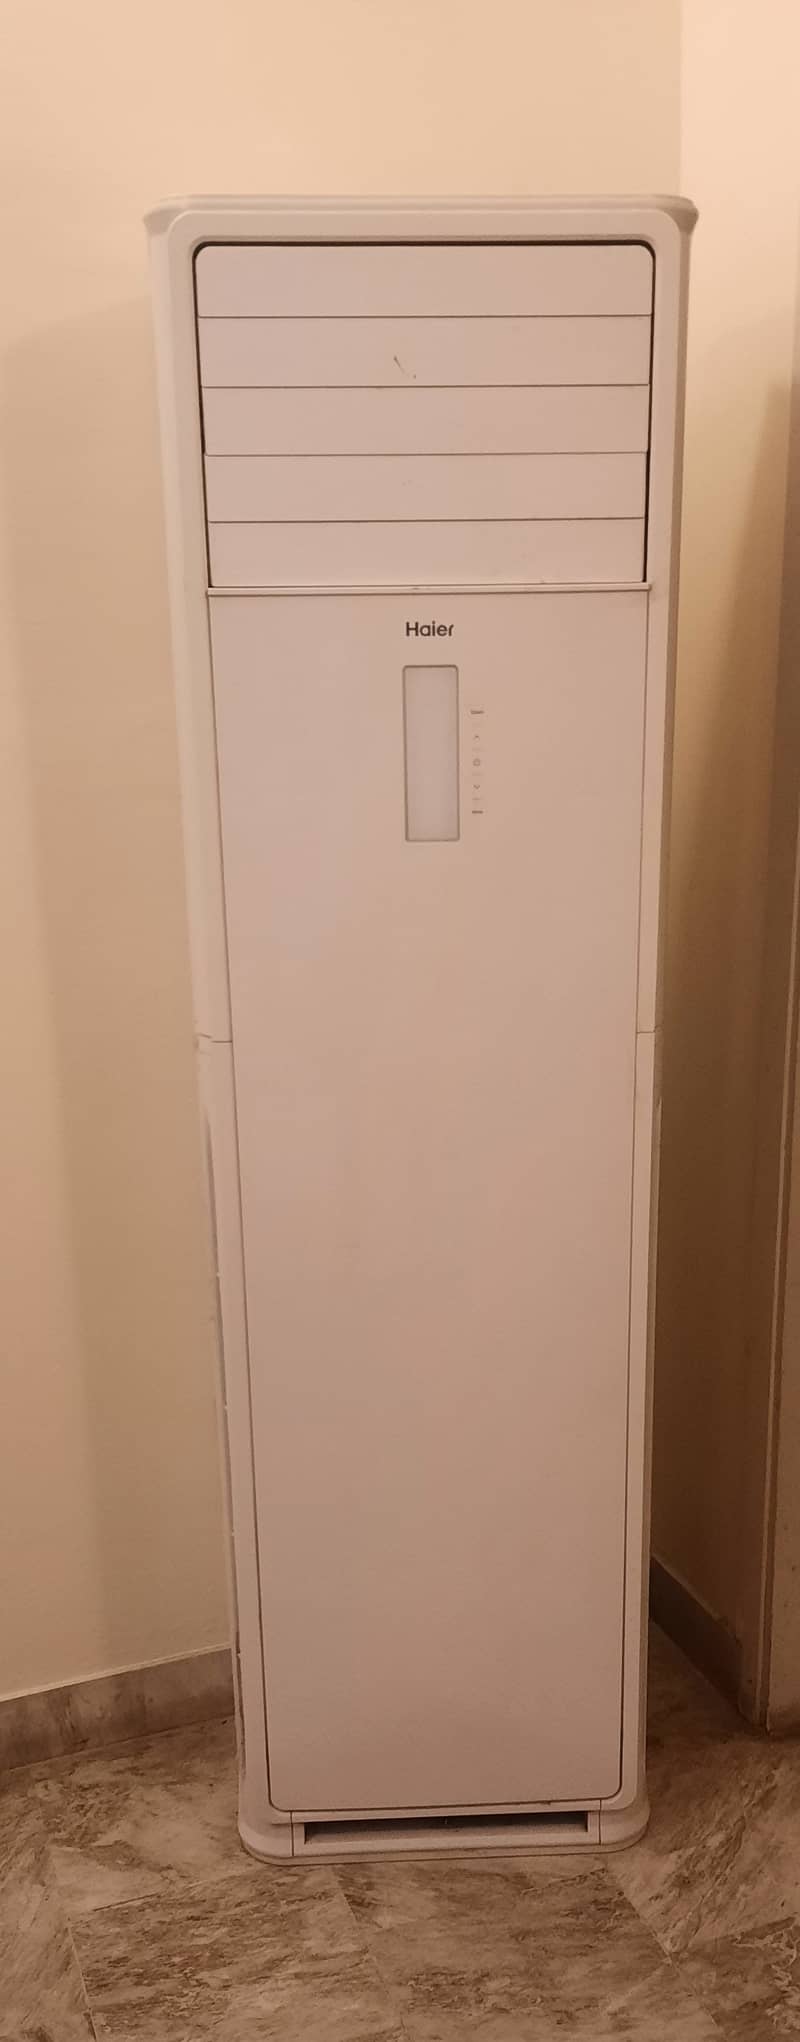 Haier Air Conditioner Standing ac 2